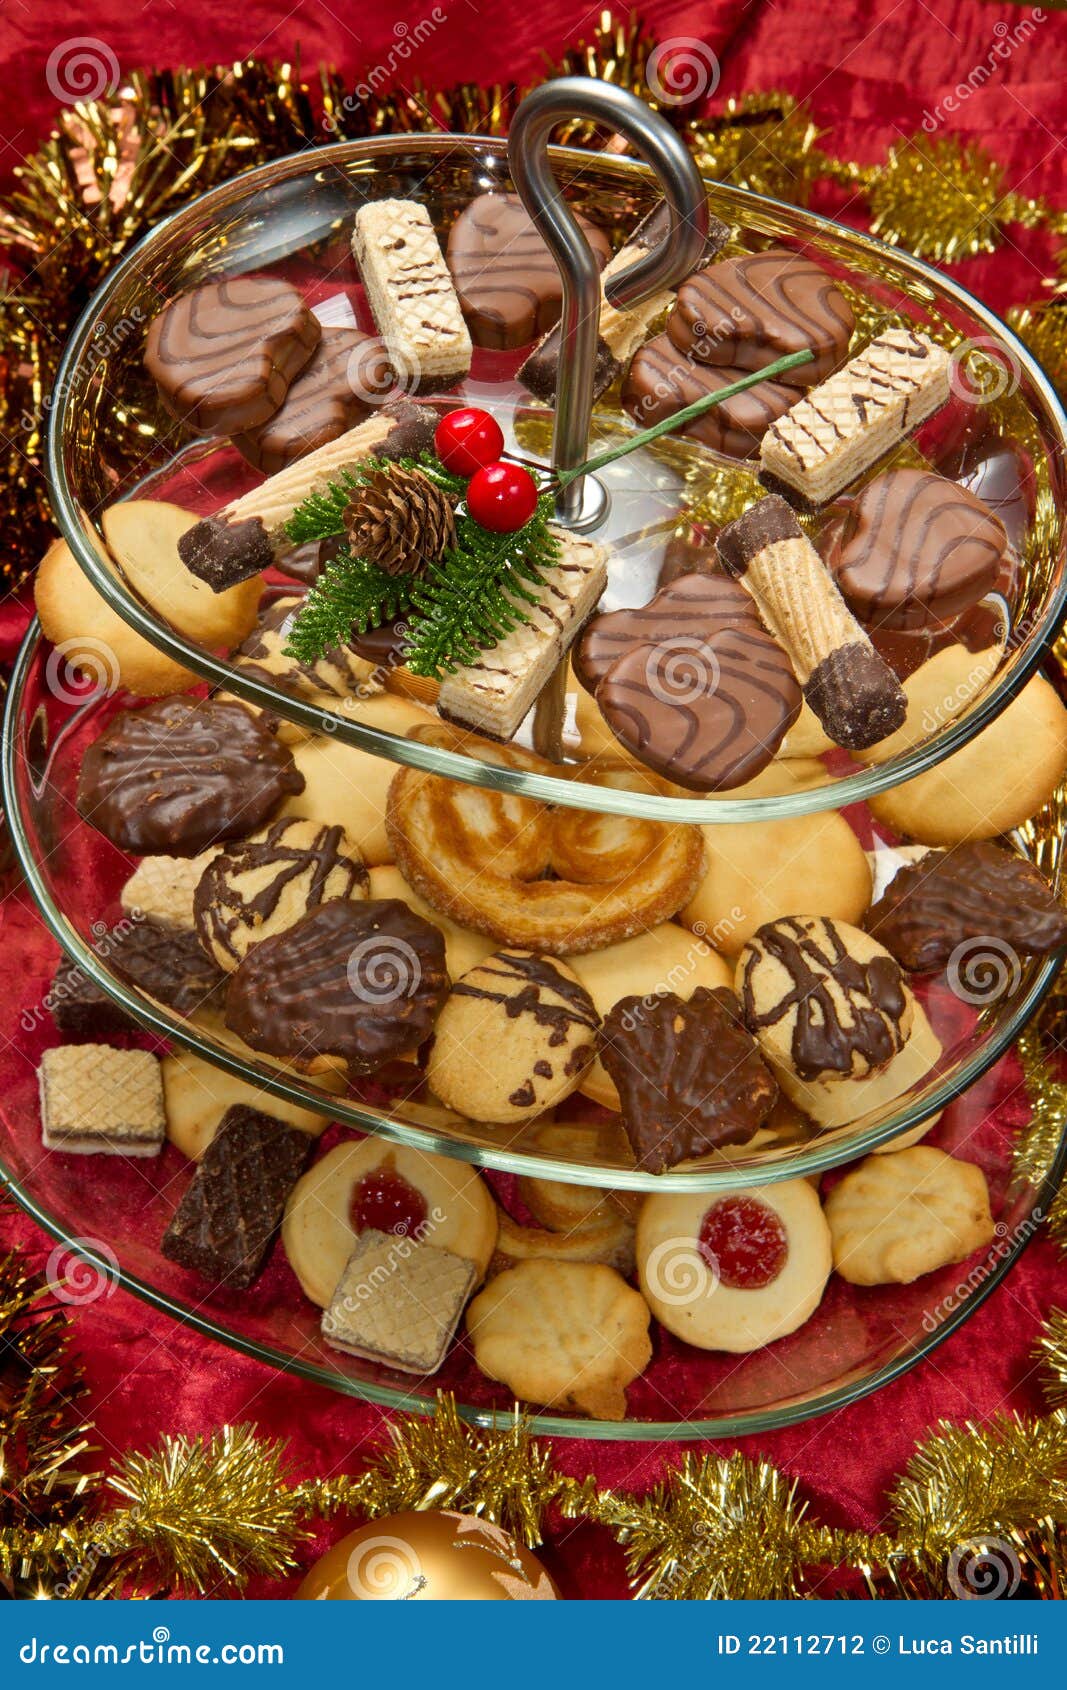 Christmas biscuits stock photo. Image of aromatic, gold - 22112712